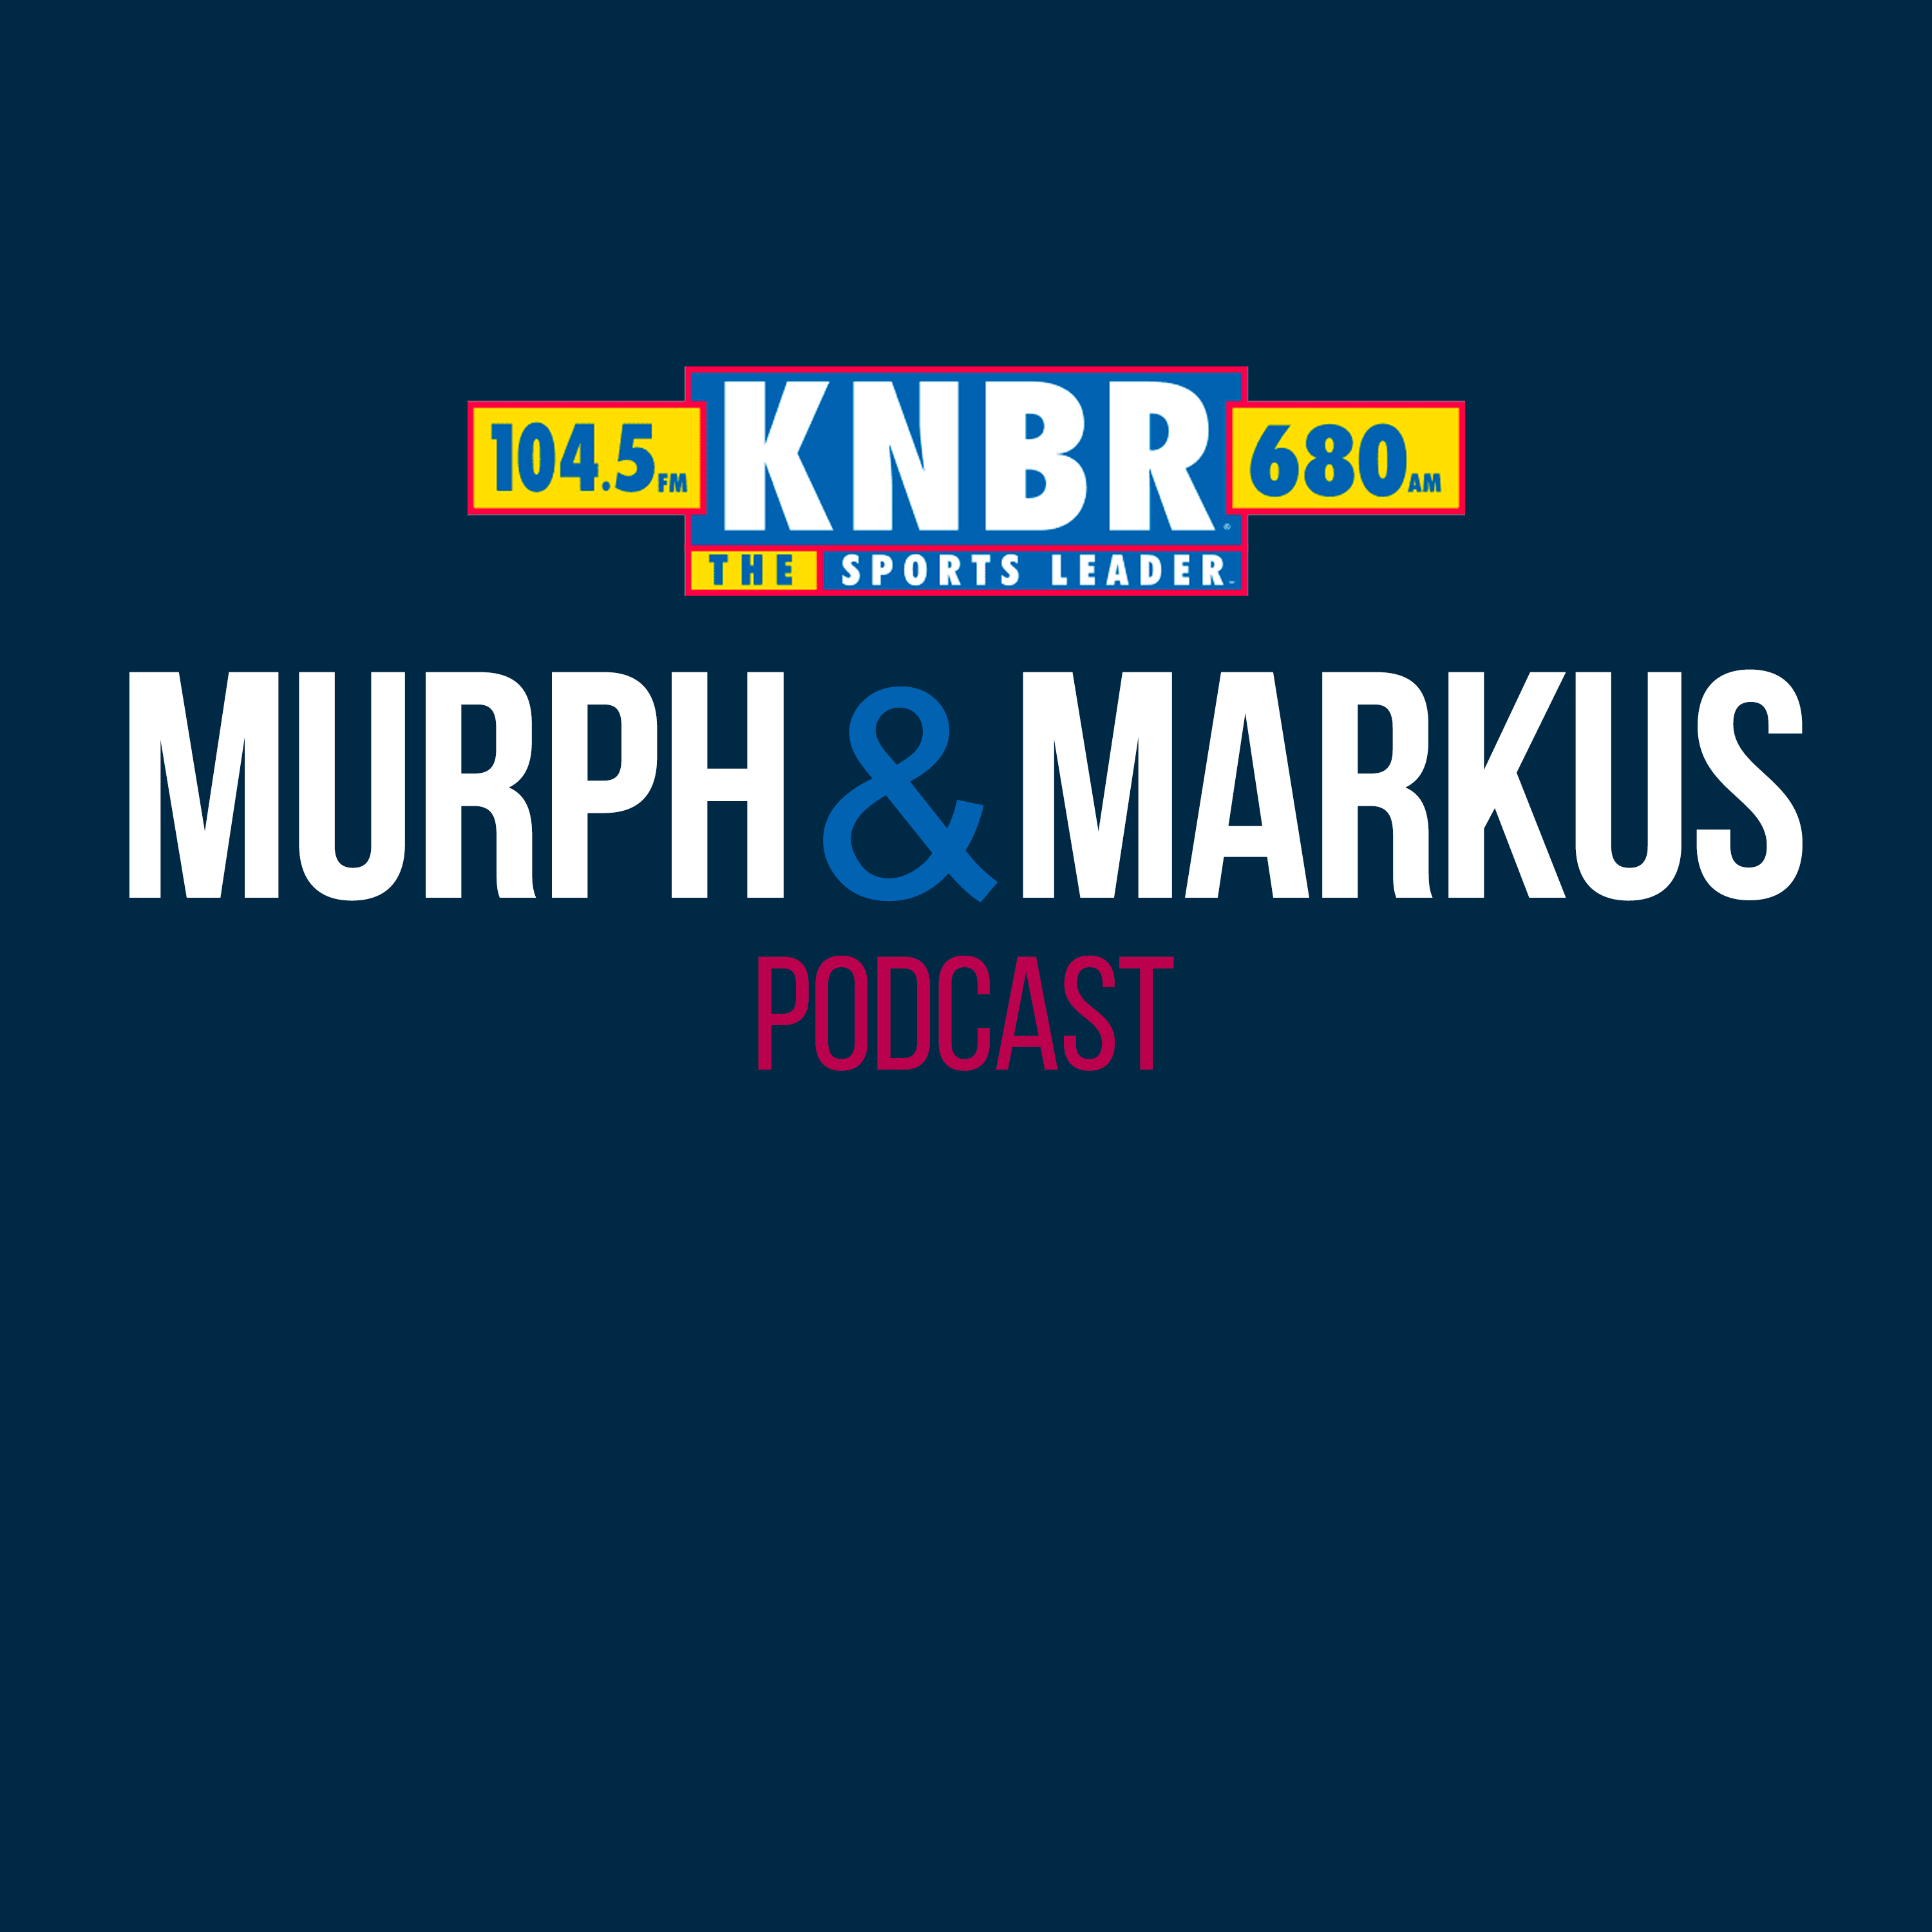 12-12 Brock Purdy joins Murph & Markus to discuss Deebo, his newfound deep ball, and 1 year anniversary as 49ers starter